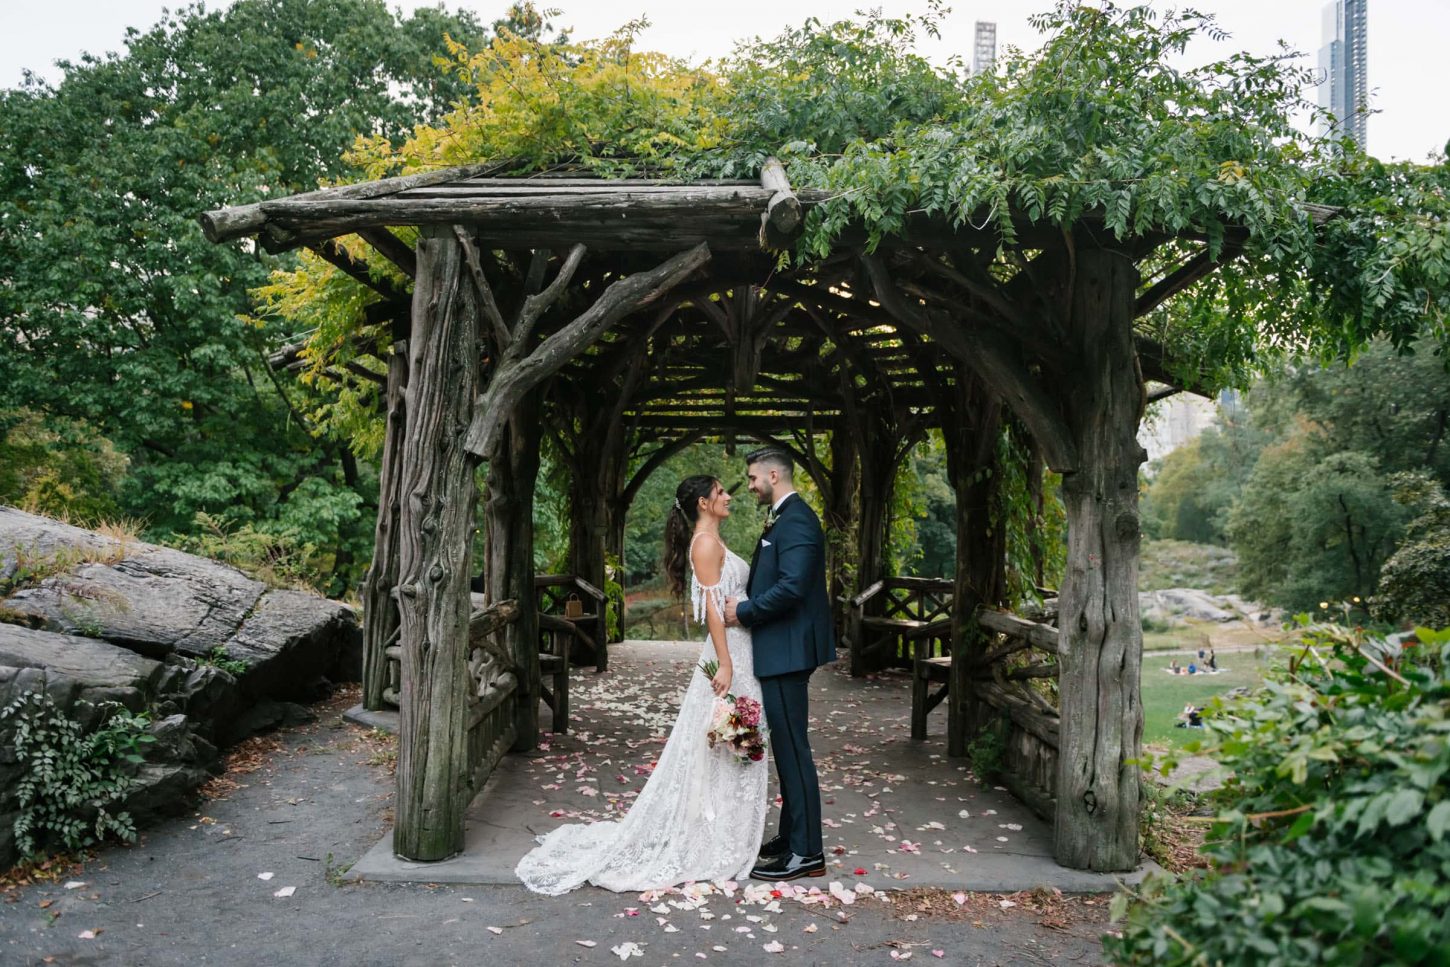 A treehouse for dreaming wedding in Central Park, New York City